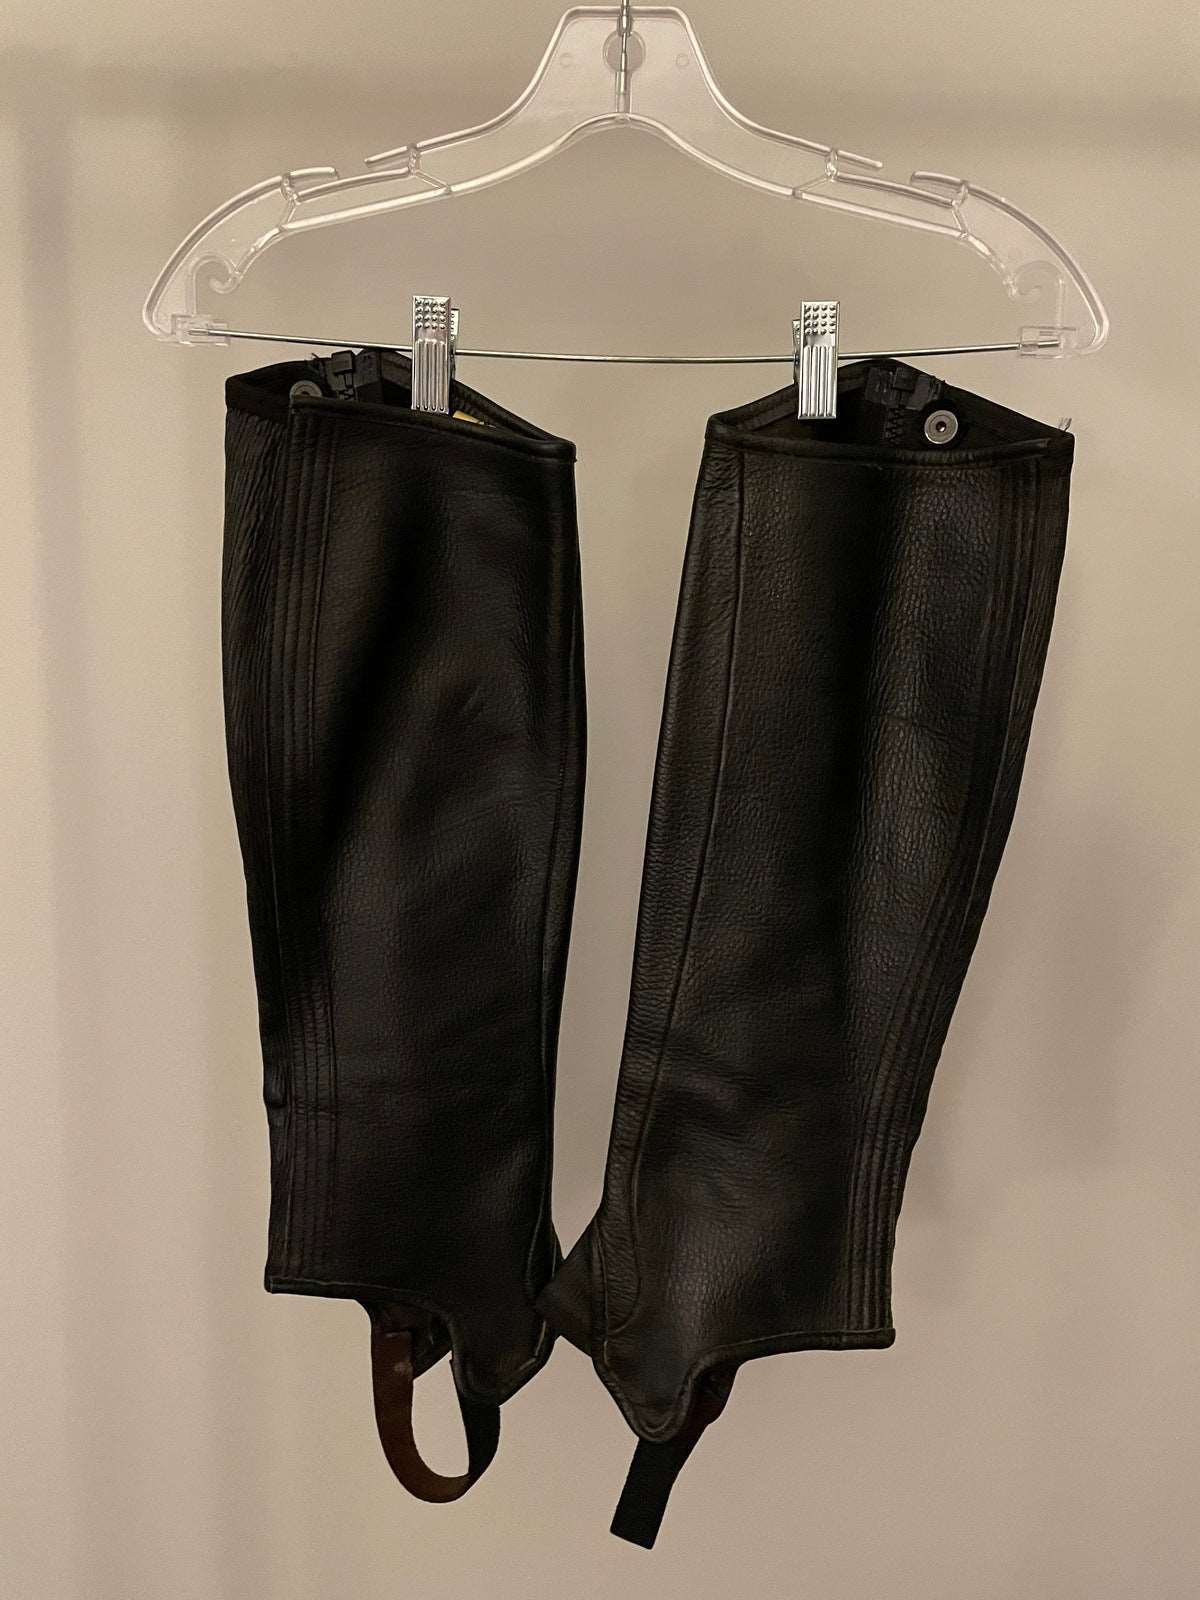 ThriftedEquestrian Clothing 15/18 Tredstep Deluxe Half Chaps - 15/18